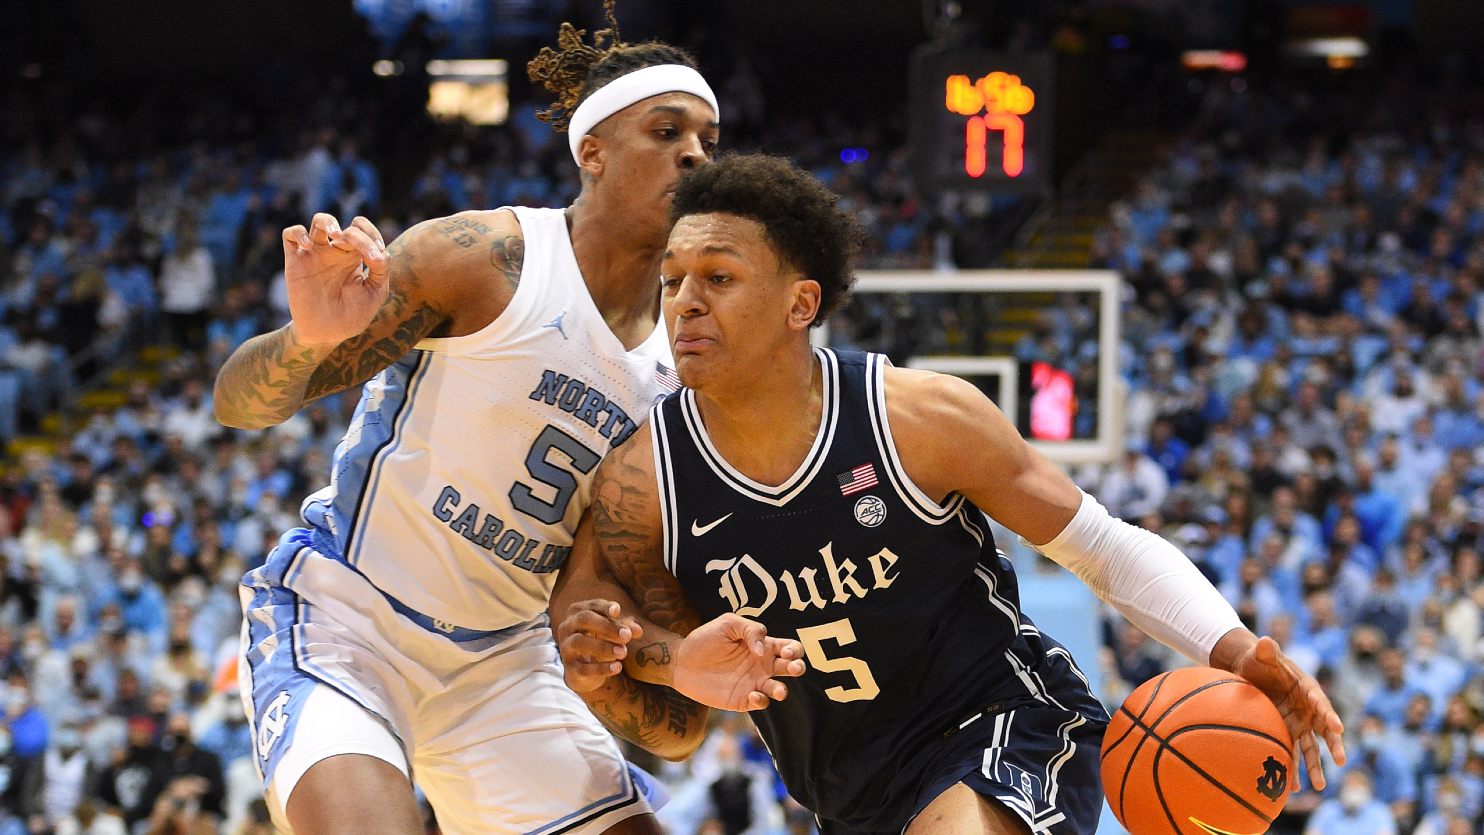 Heres How to Watch Duke and North Carolina Renew the Rivalry